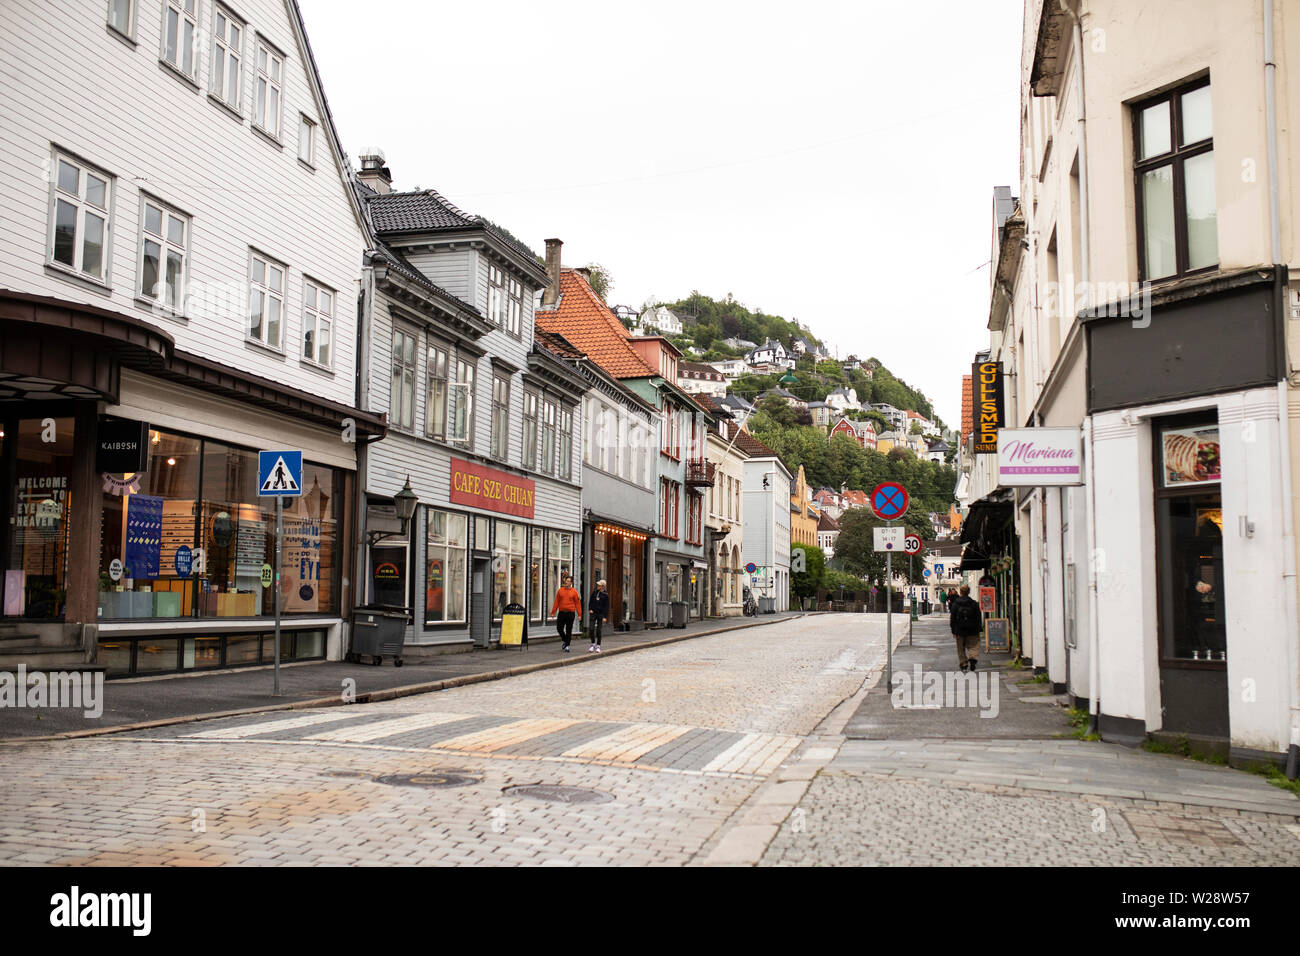 Norway Street High Resolution Stock Photography and Images - Alamy